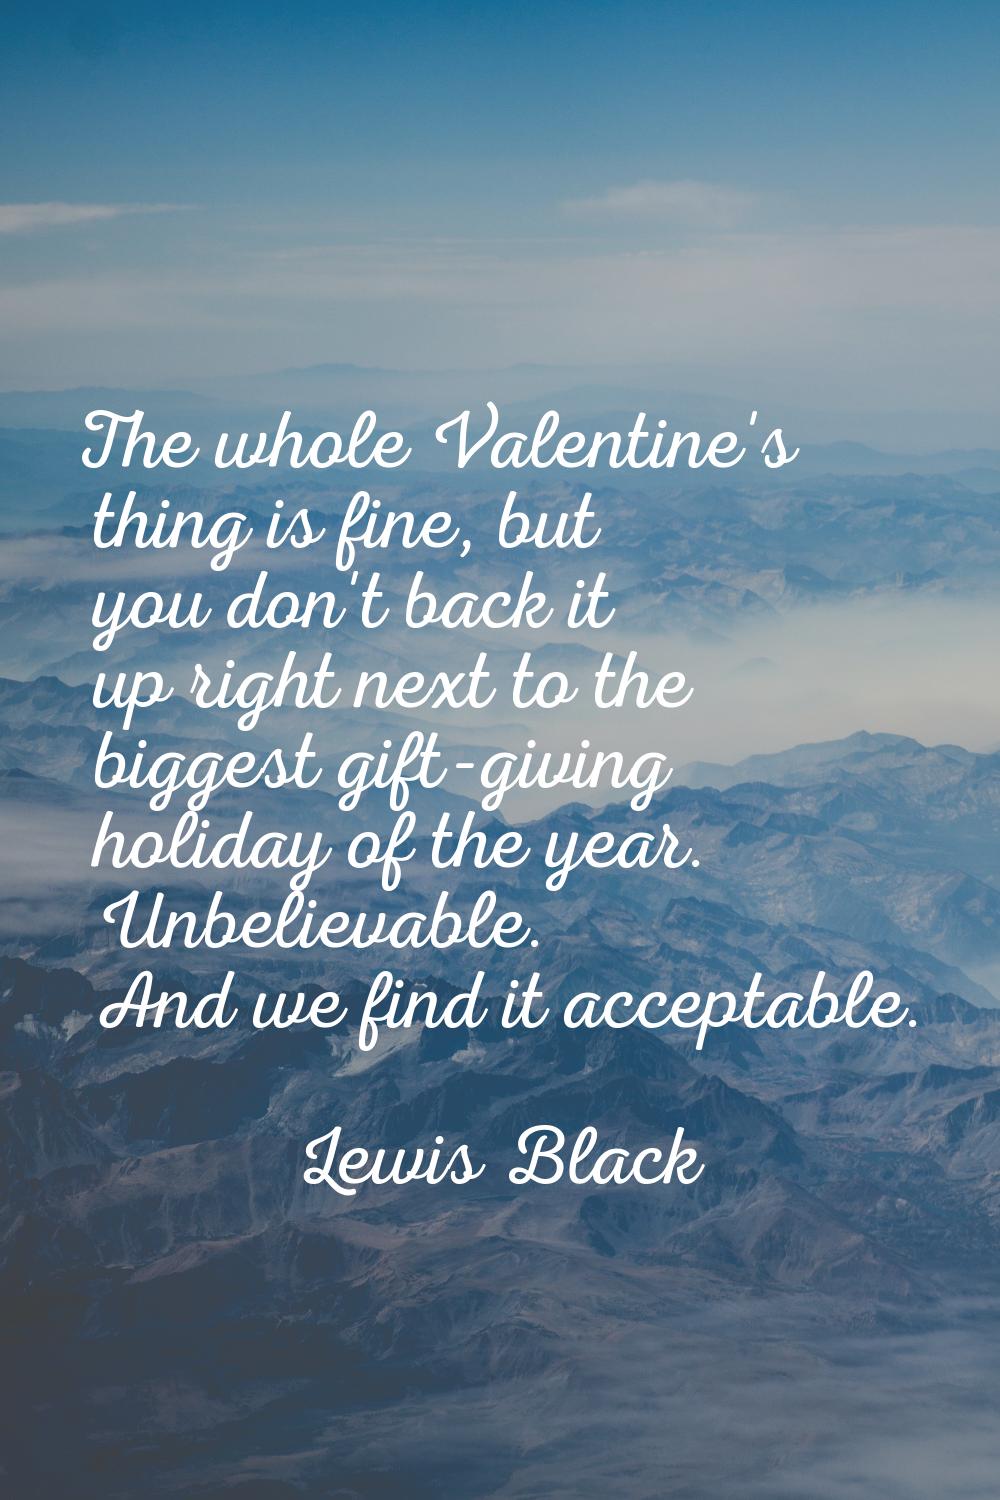 The whole Valentine's thing is fine, but you don't back it up right next to the biggest gift-giving